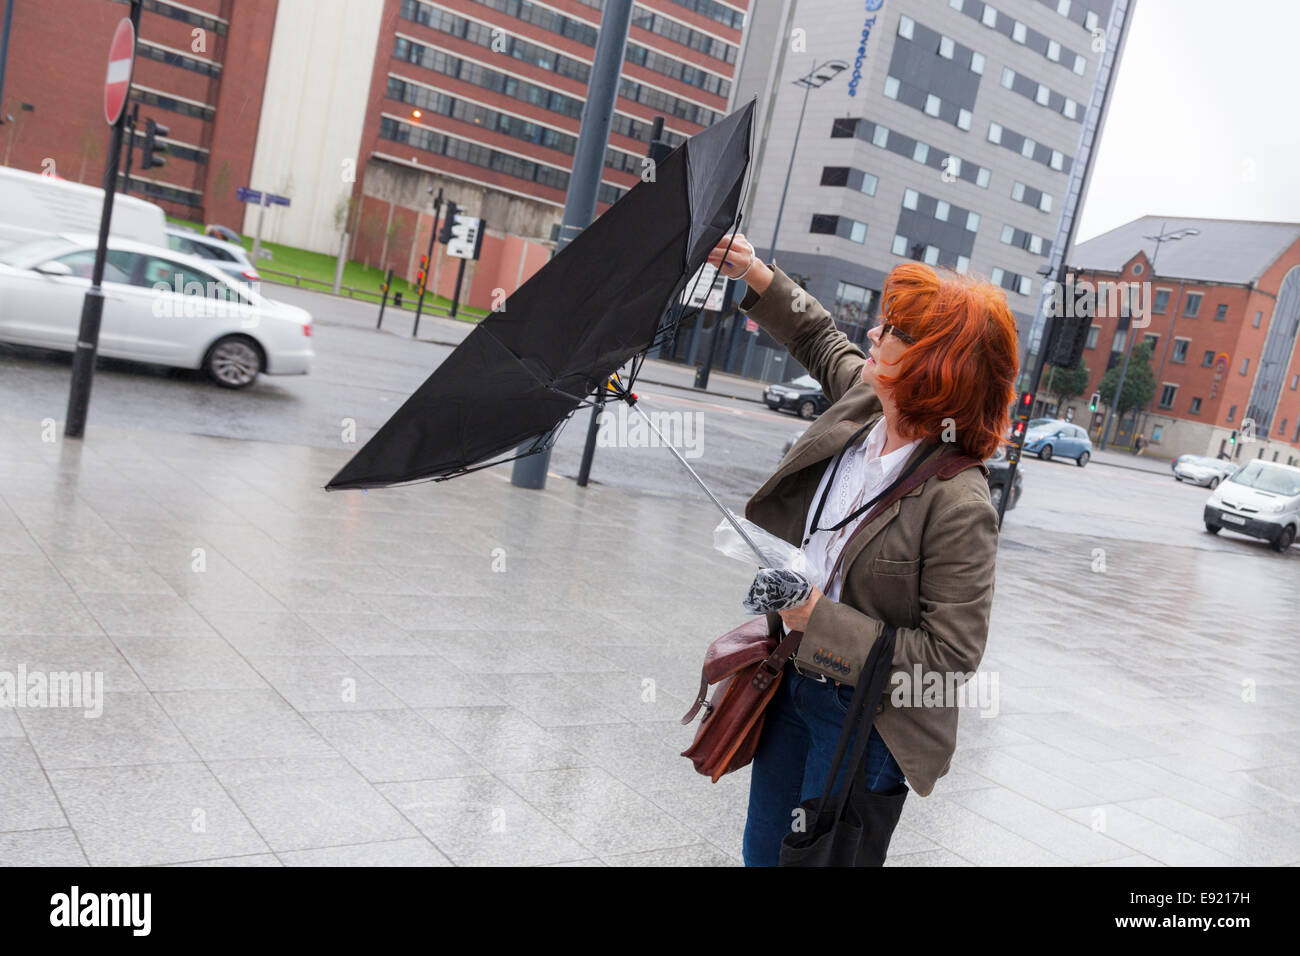 Umbrella, windy day. Person with a brolly blown inside out by the wind, Liverpool, England, UK Stock Photo